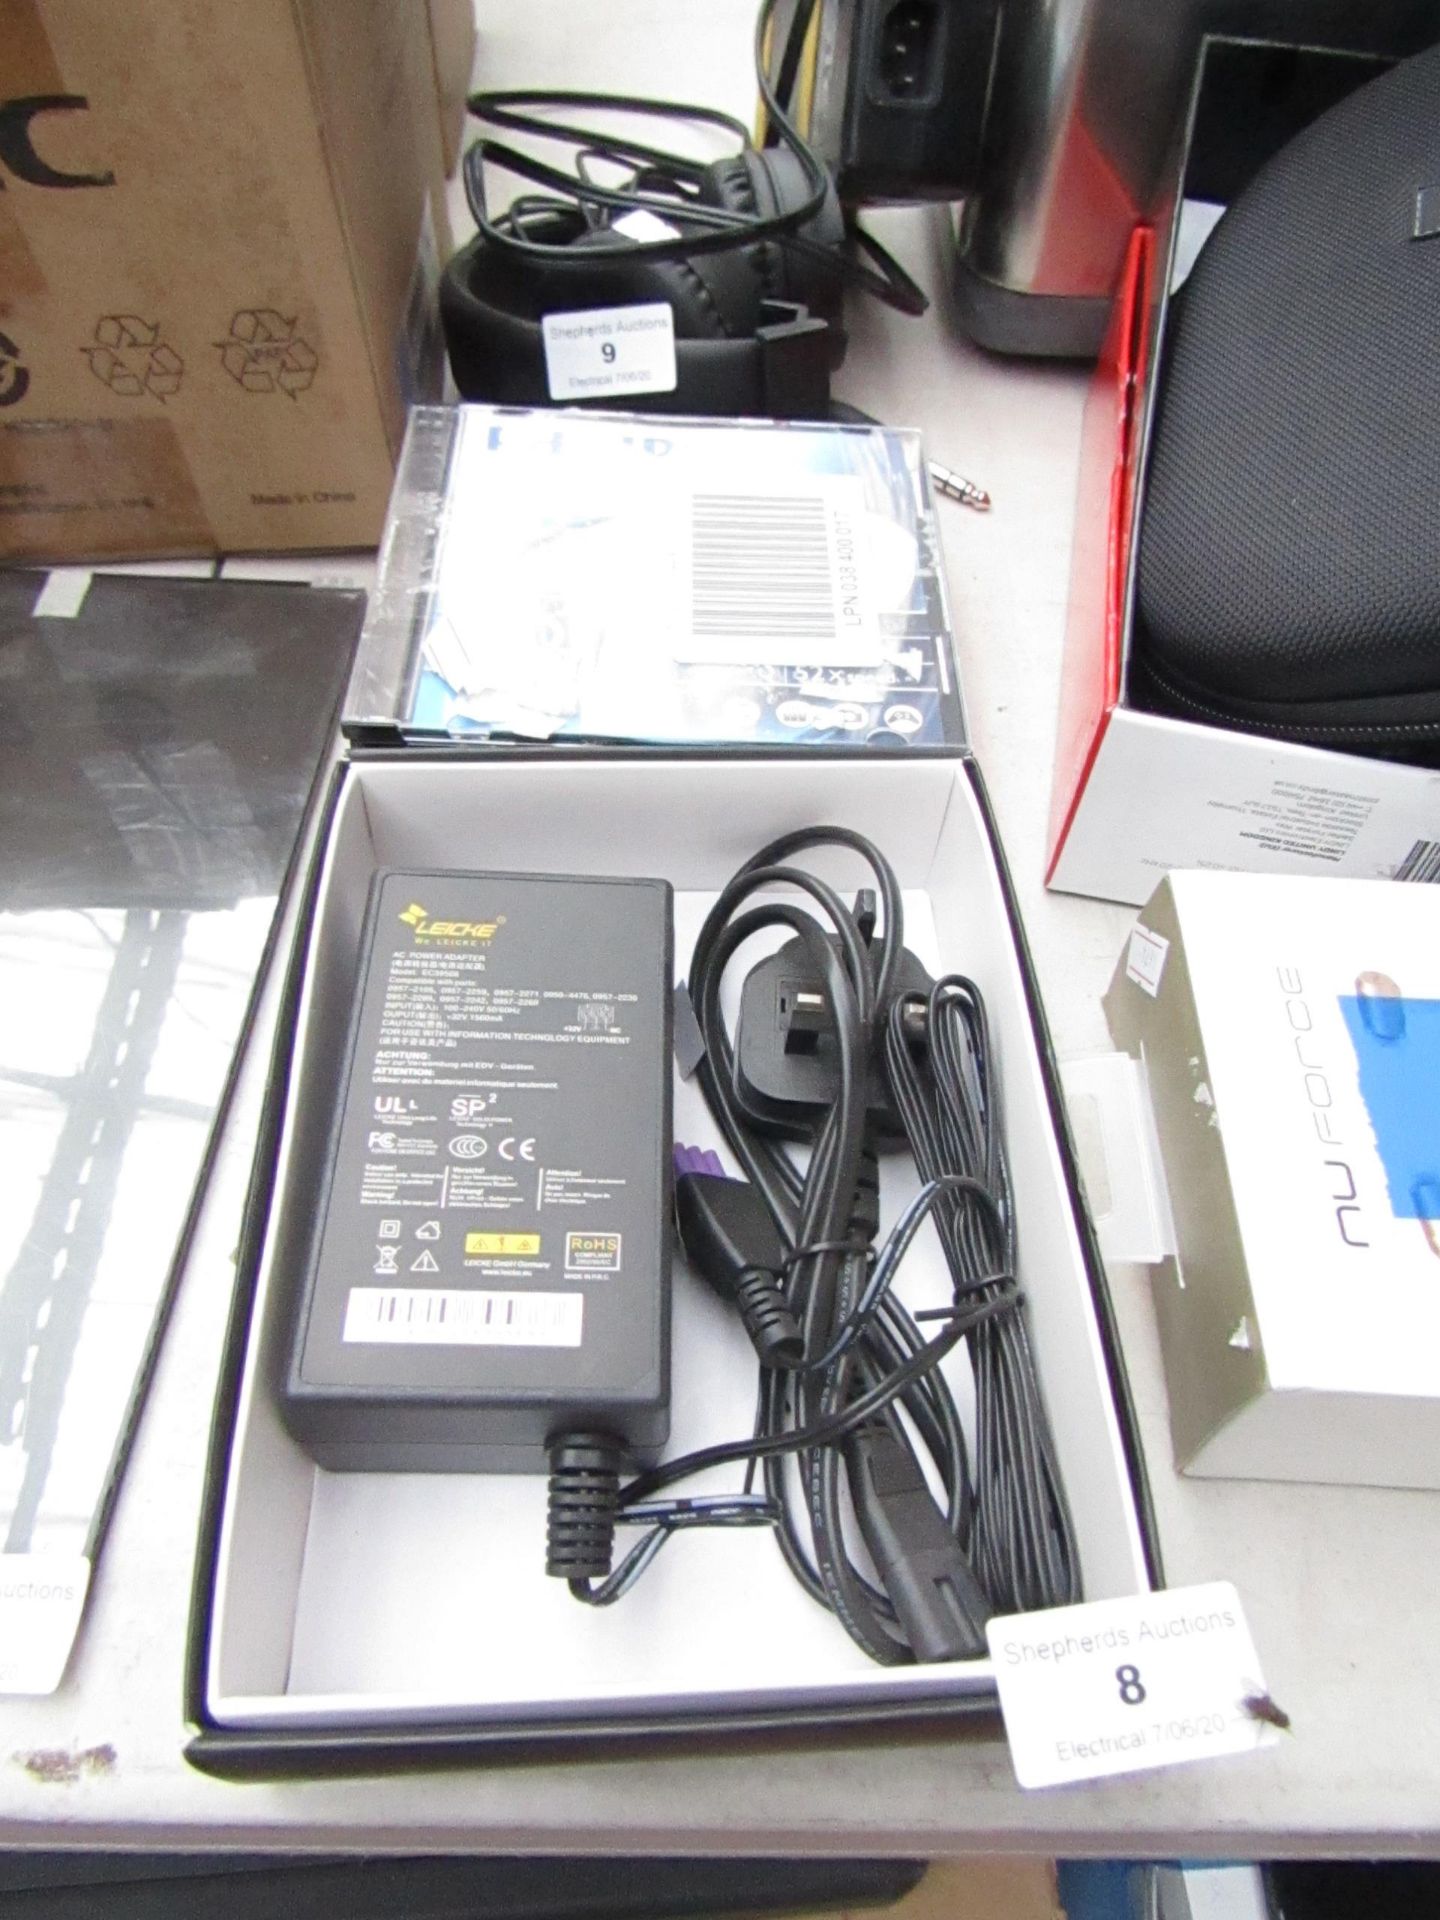 Leicke AC power adaptor with 10x Philips CD-R discs, untested and boxed.